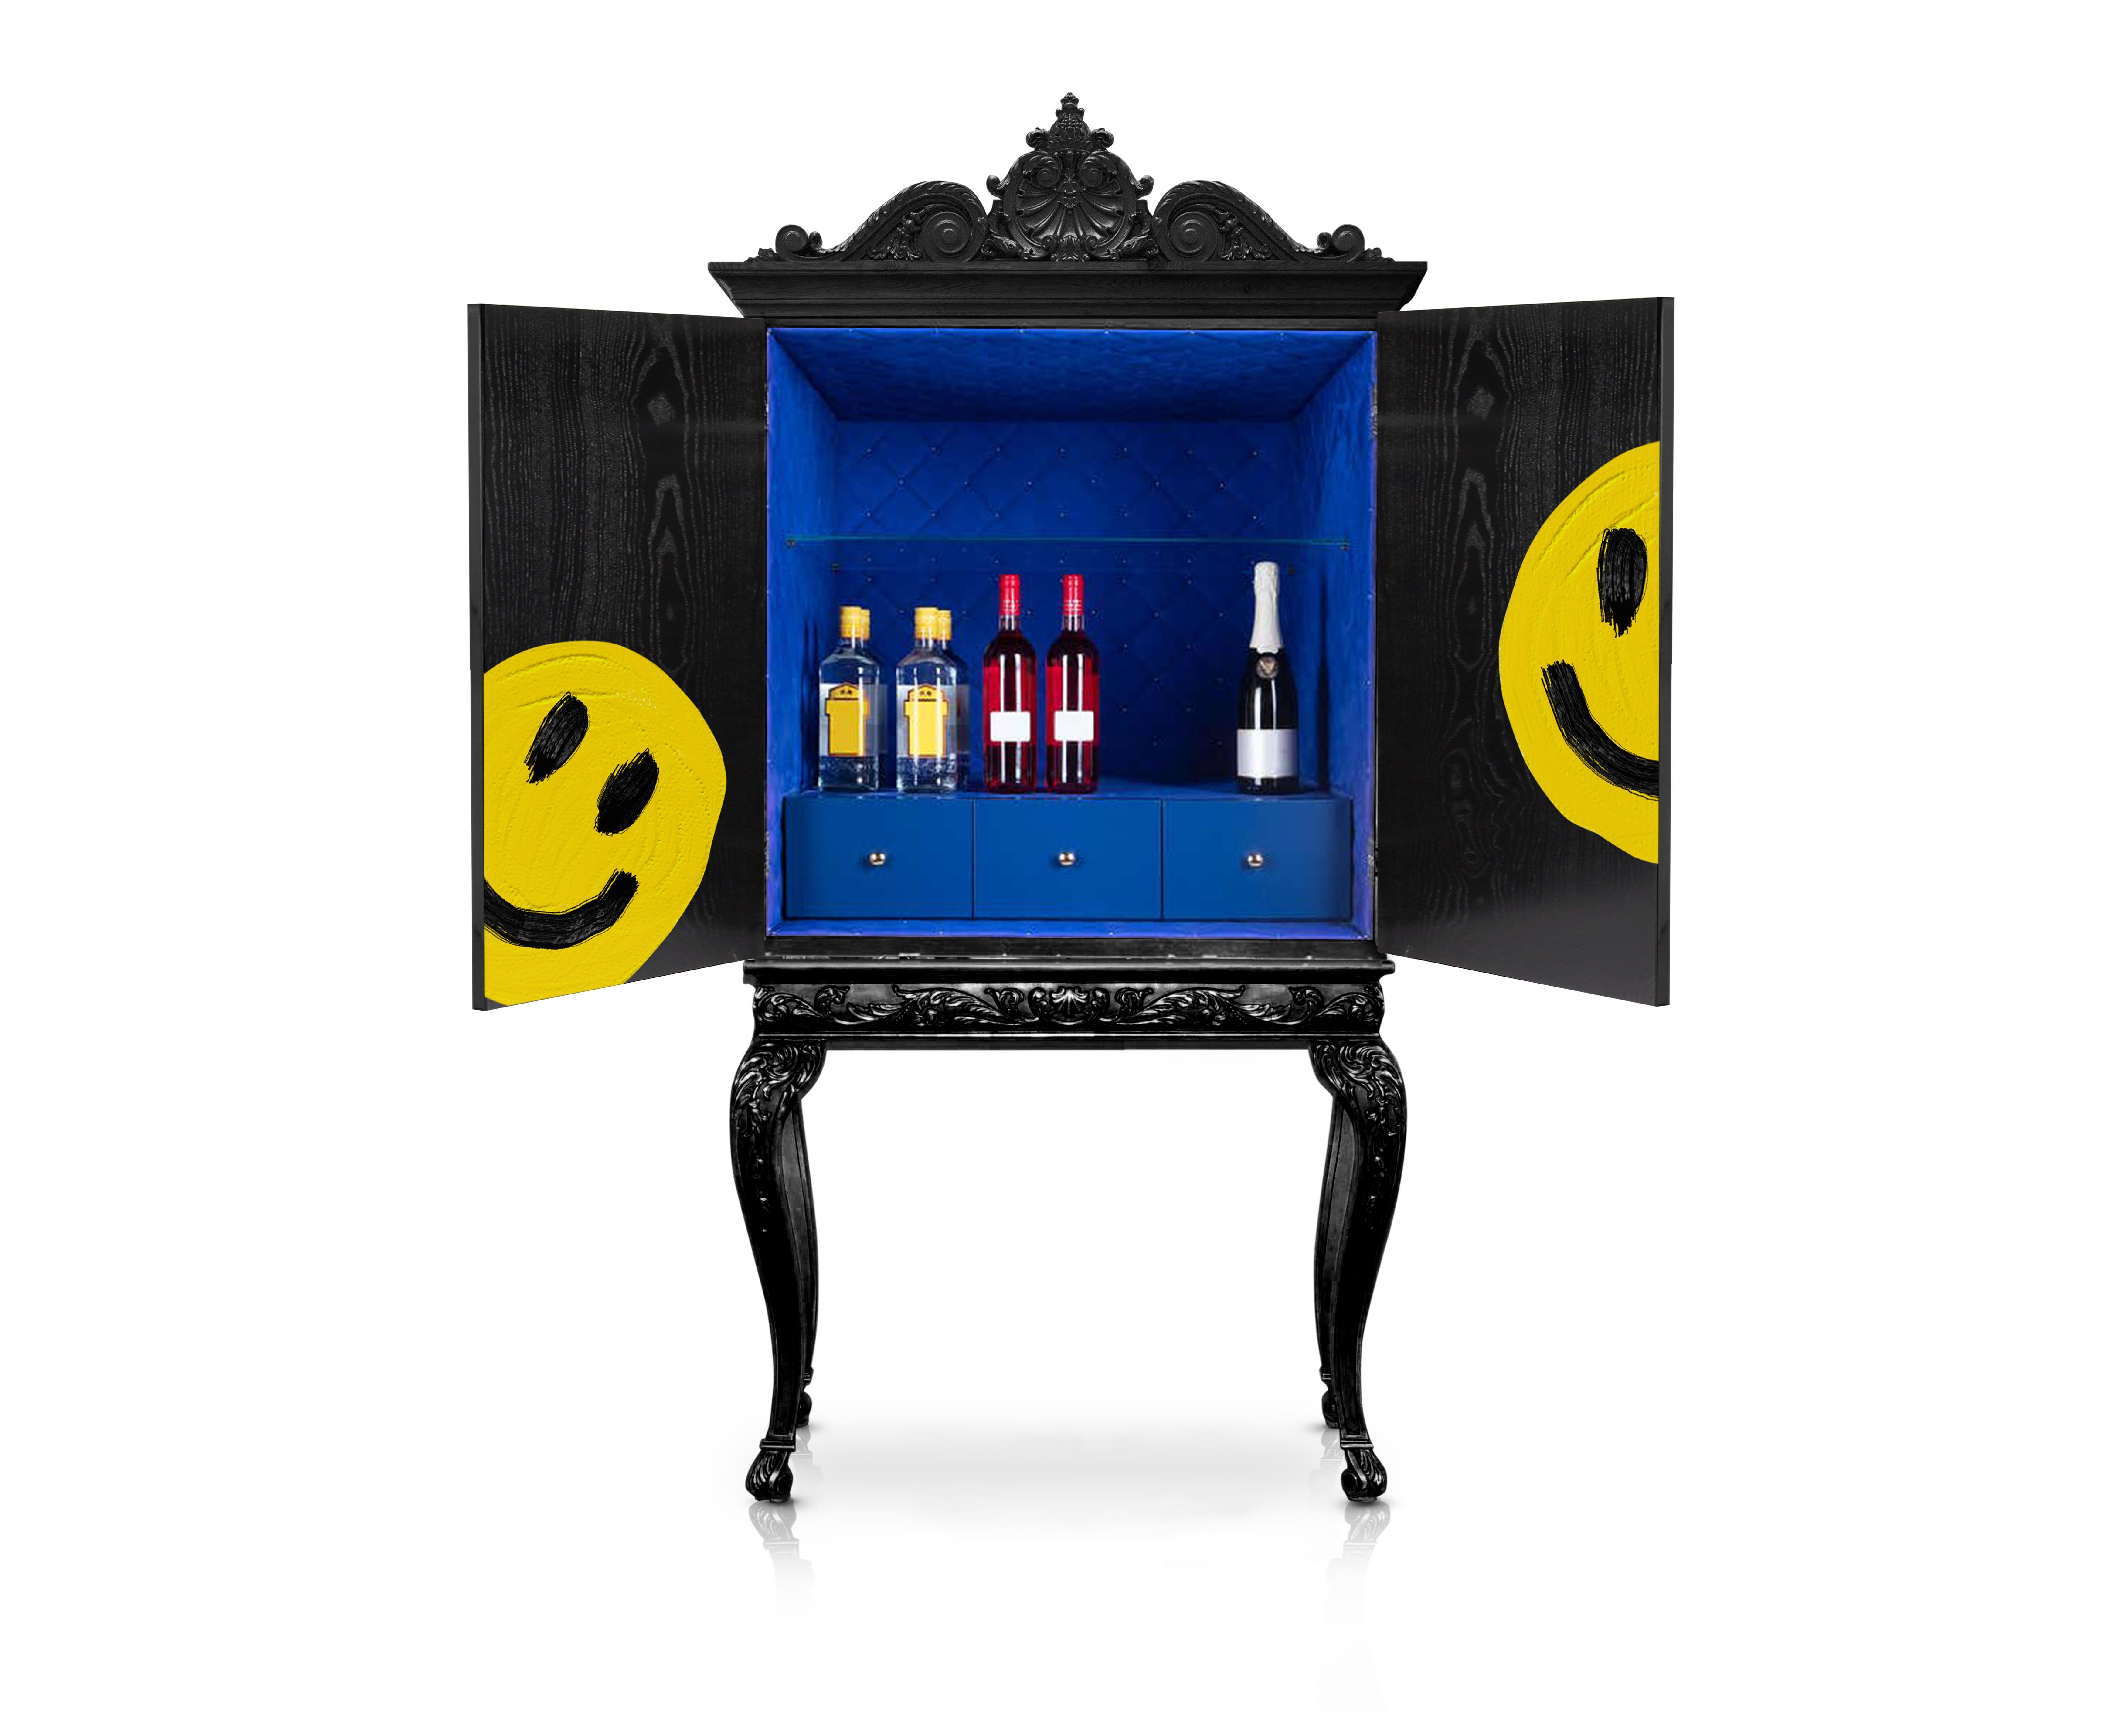 Introducing the ultimate statement piece for art lovers who also appreciate functionality - the drink cocktail bar. This stunning bar cabinet is expertly crafted from solid oak and premium oak veneers, with beautiful hand carved wood elements that